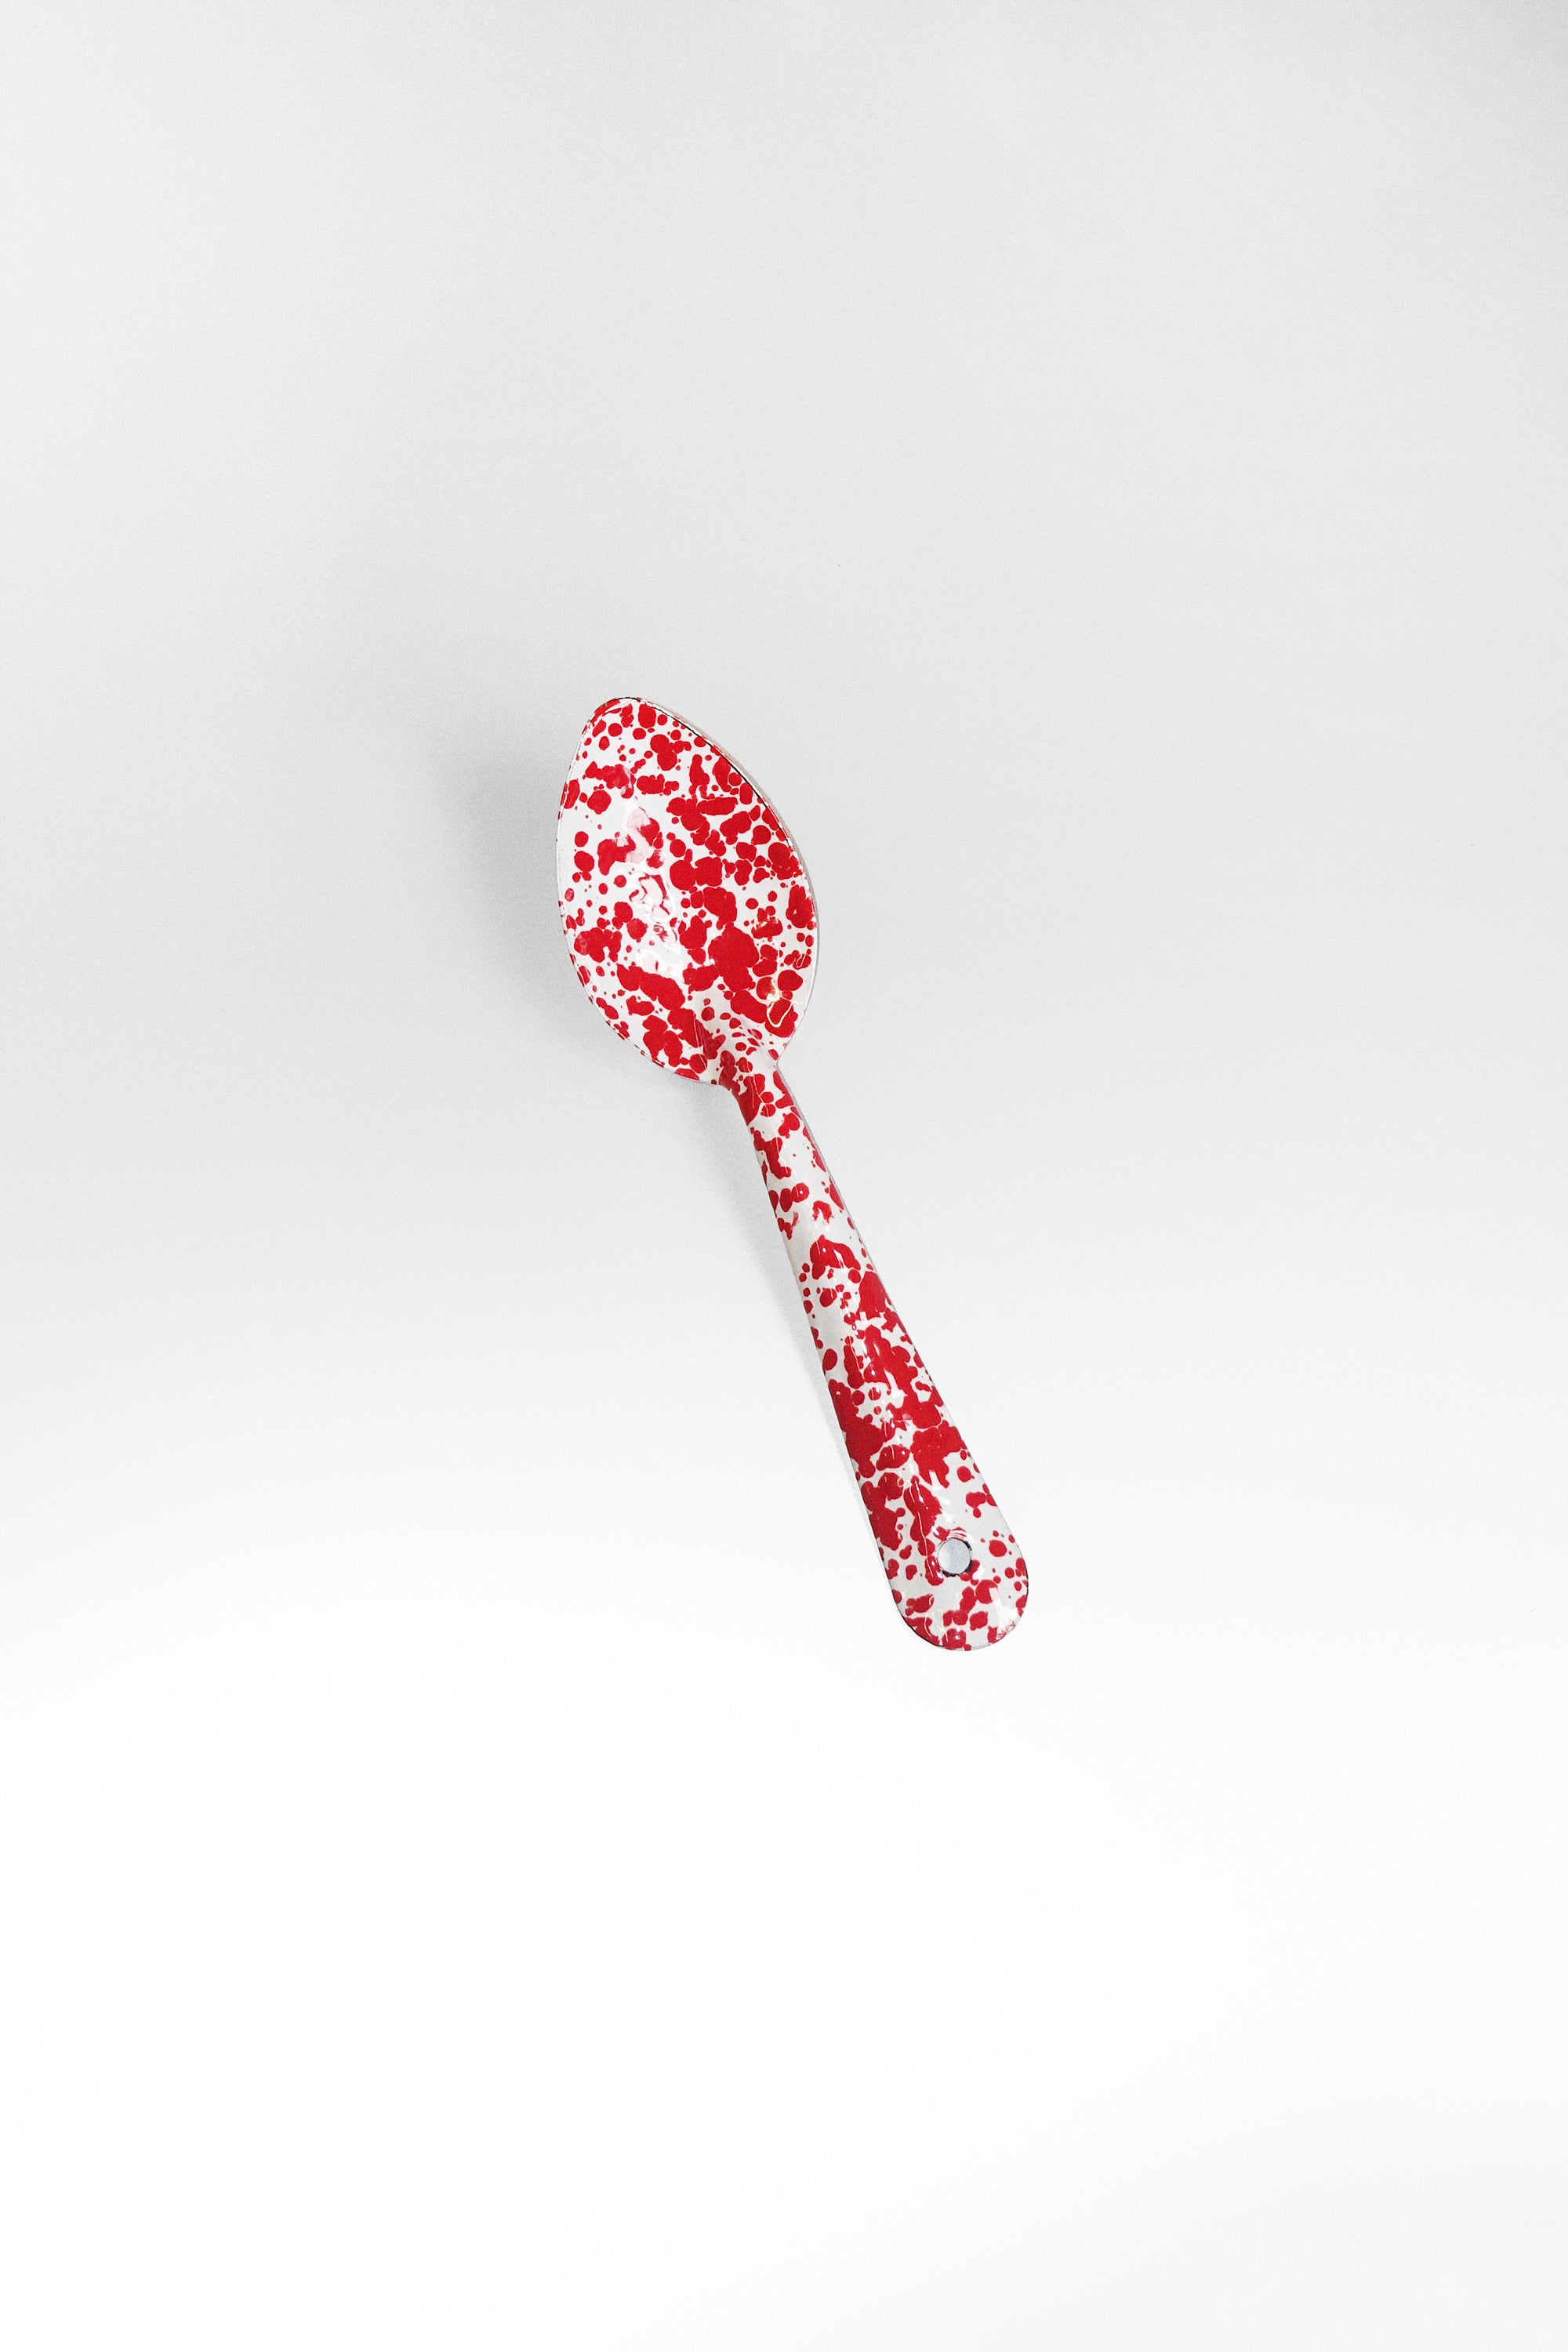 Medium Spoon in Red Splatter by Crow Canyon Home